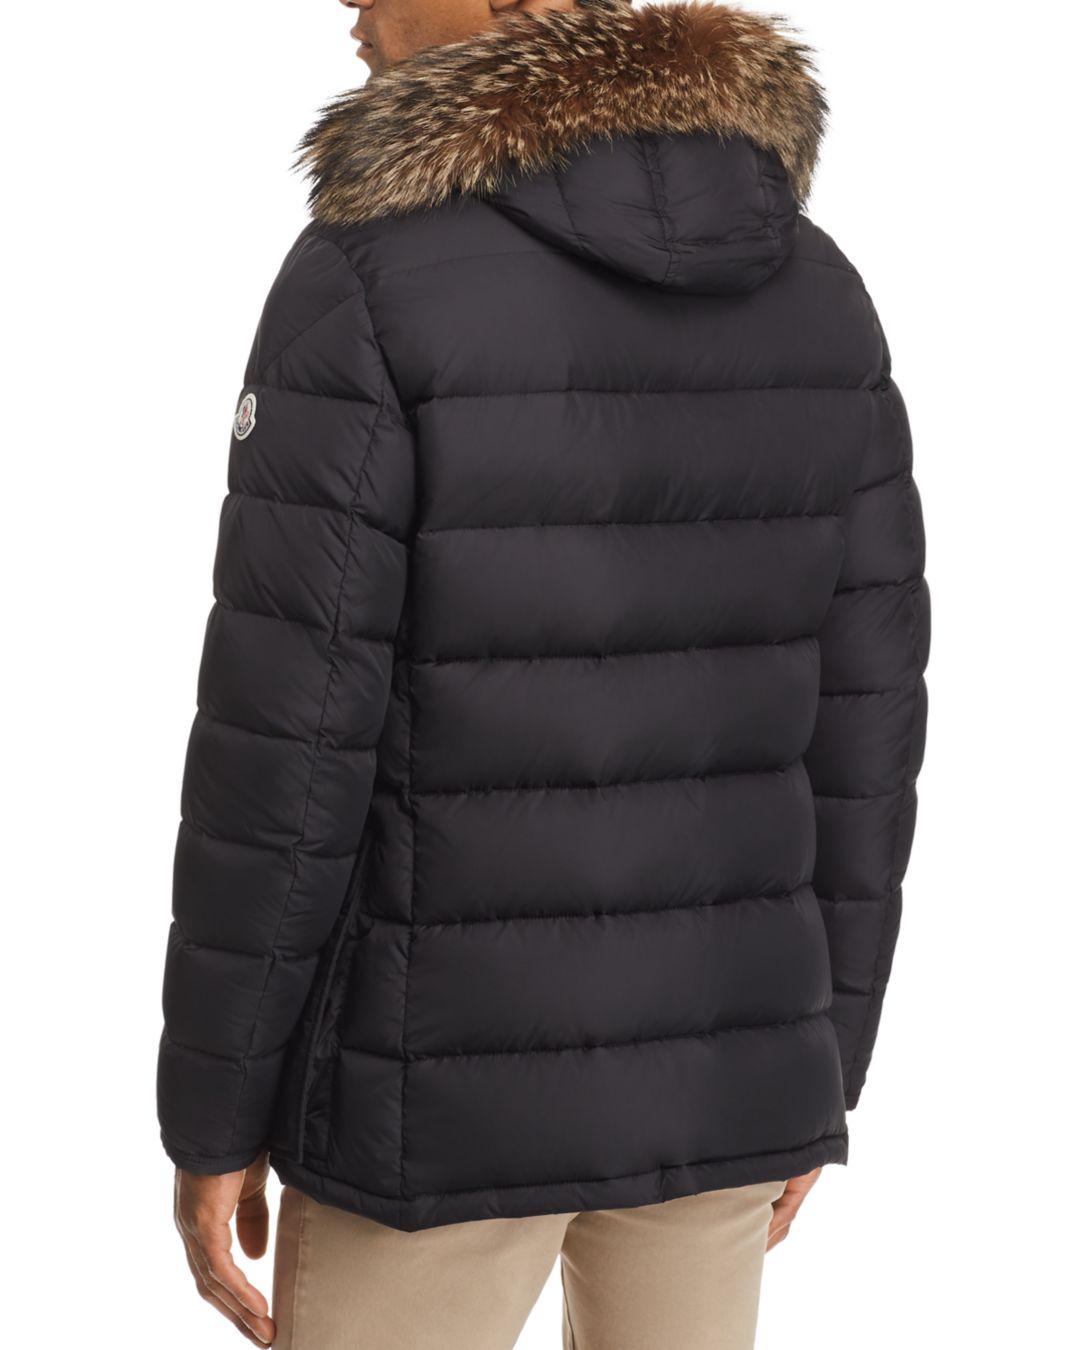 Moncler Cluny Jacket Factory Sale, 57% OFF | www.chine-magazine.com